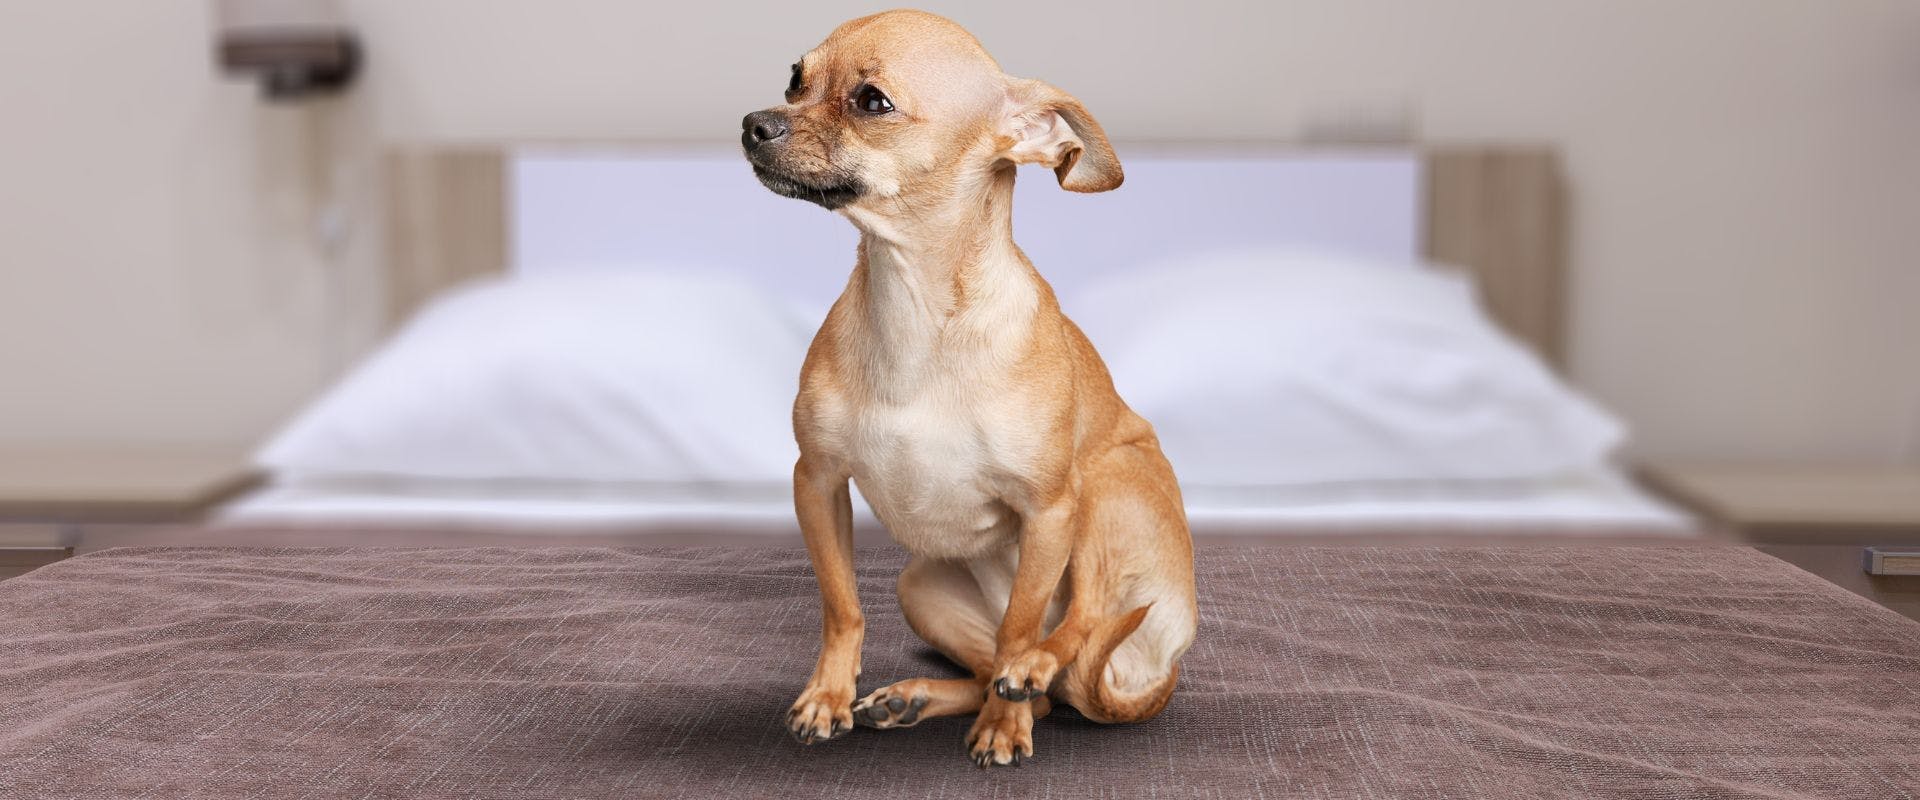 Chihuahua dog sat on a wet spot on a bed